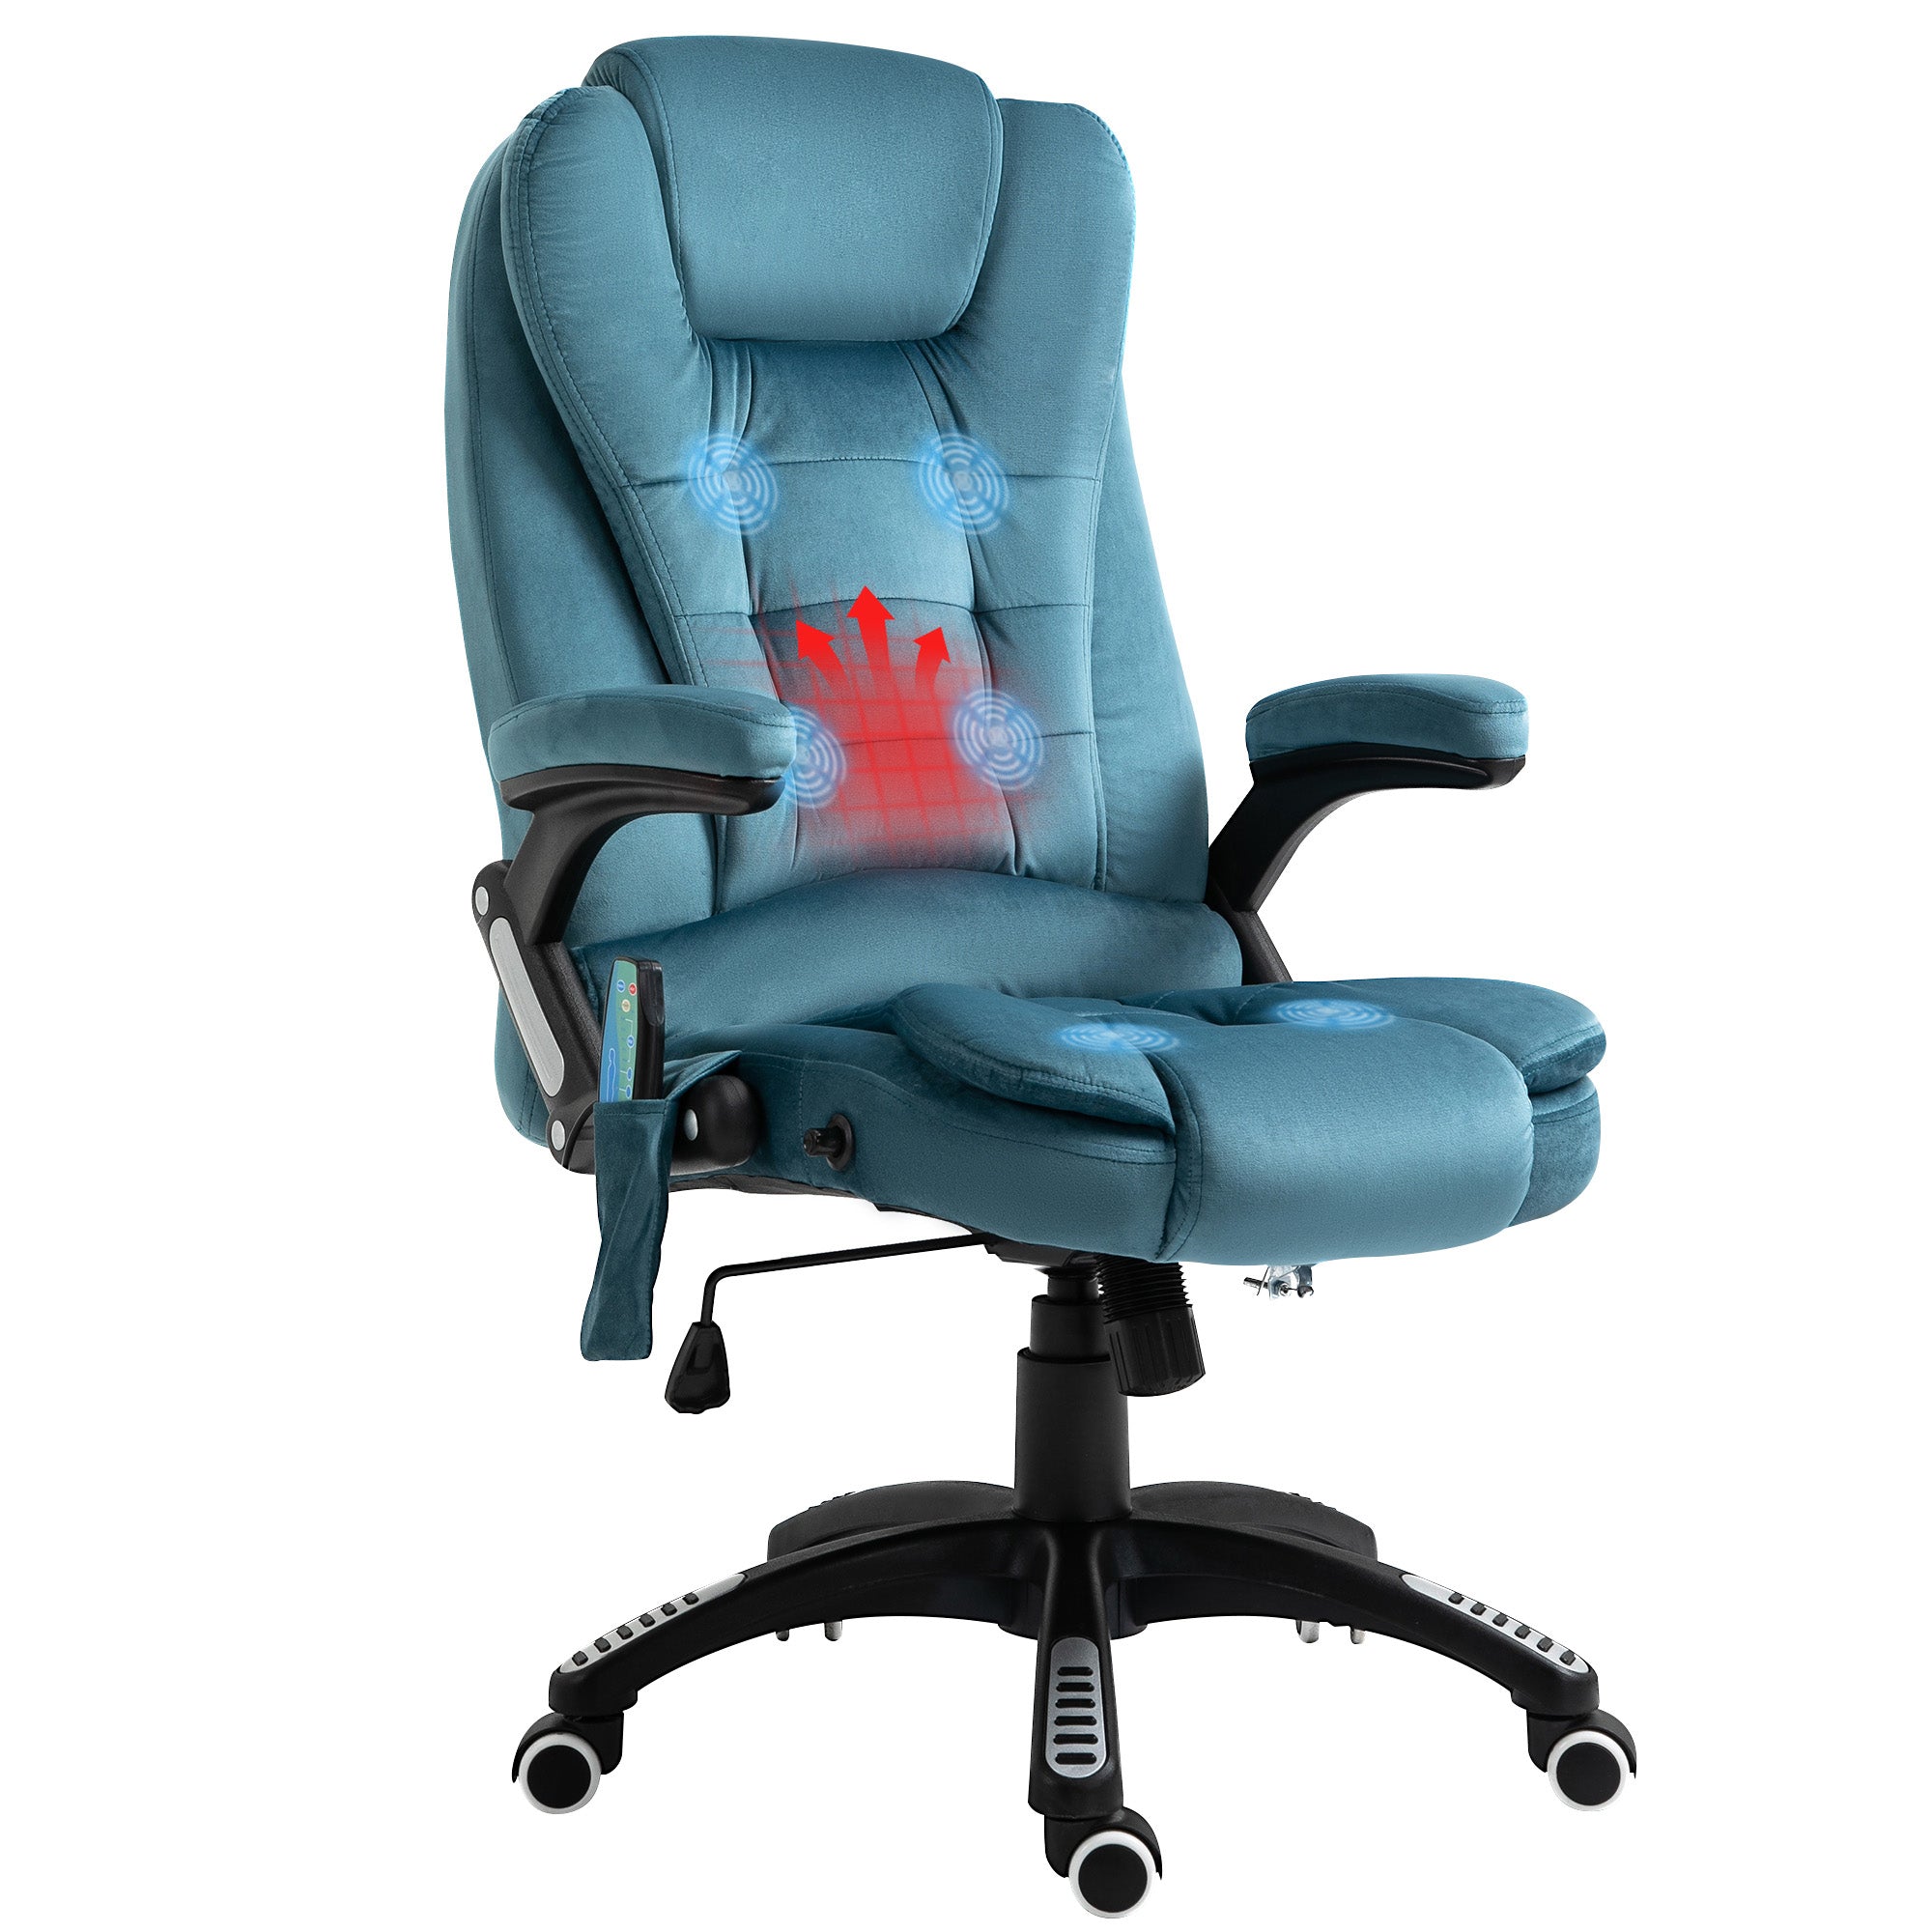 Vinsetto Office Chair w/ Heating Massage Points Relaxing Reclining Blue  | TJ Hughes